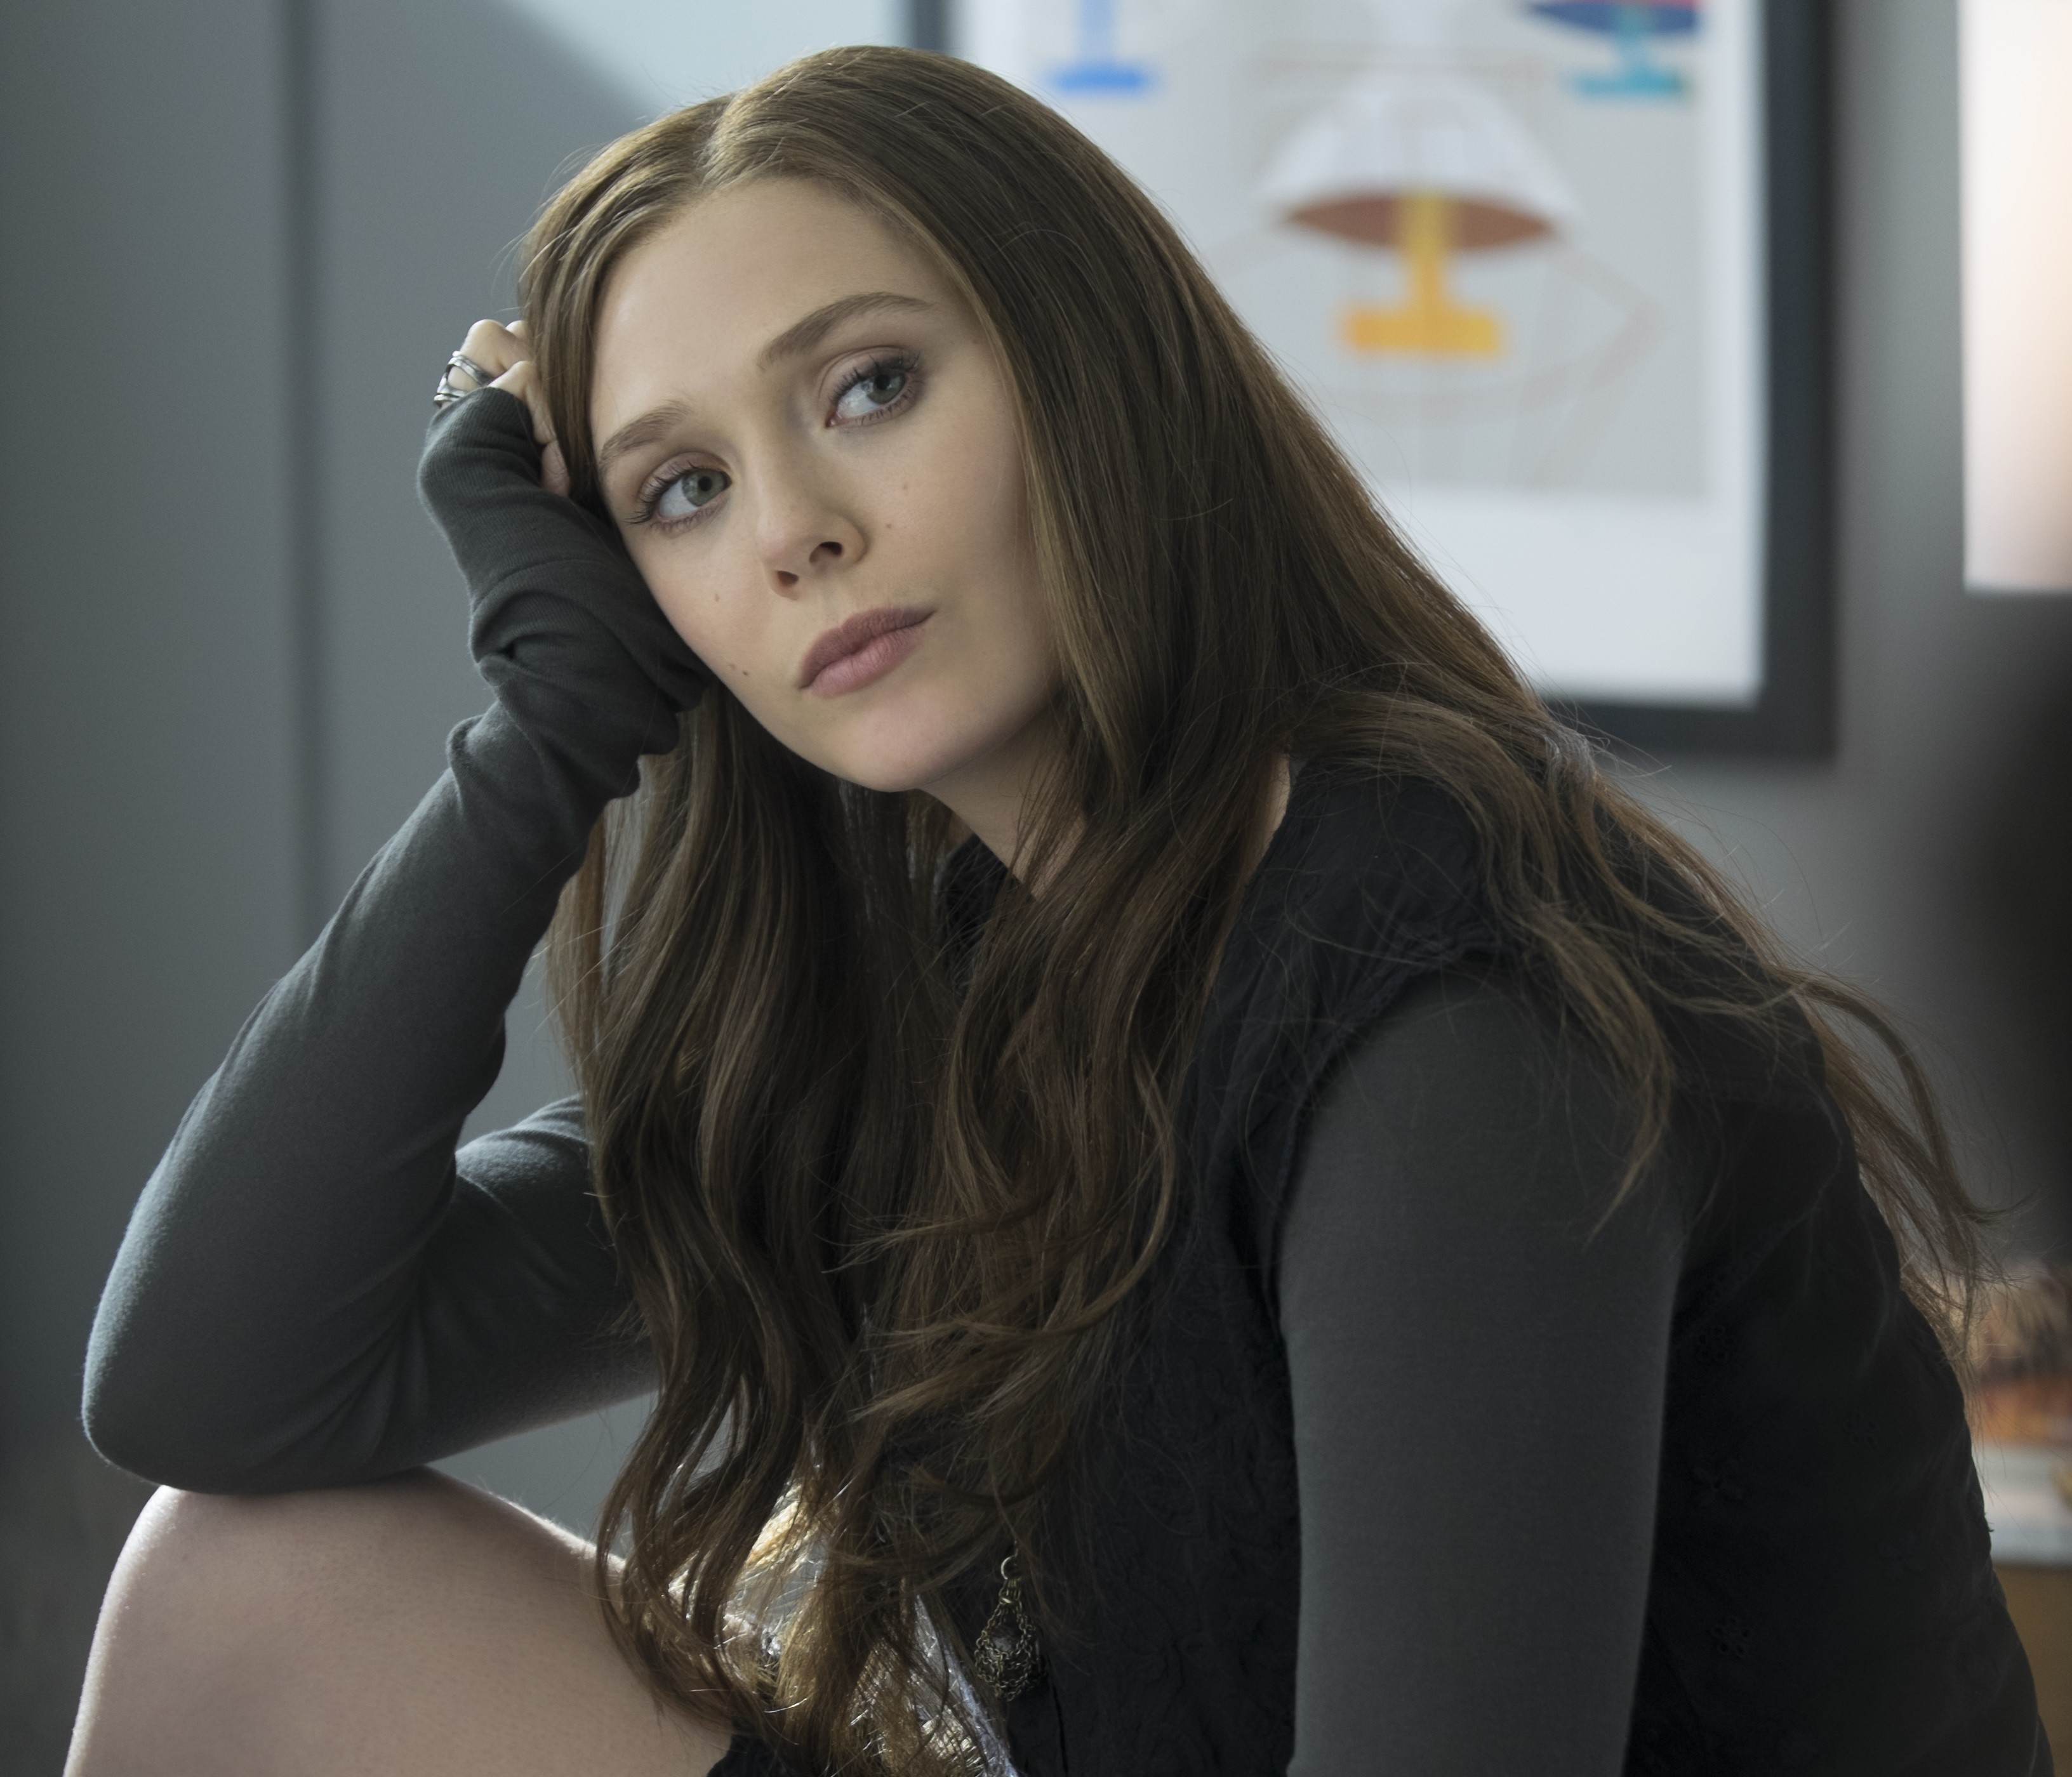 People 3264x2800 women actress brunette Elizabeth Olsen  hands on head Captain America: Civil War Scarlet Witch Marvel Cinematic Universe movies long hair looking away women indoors film stills lipstick American women arm support closed mouth thinking grey clothing